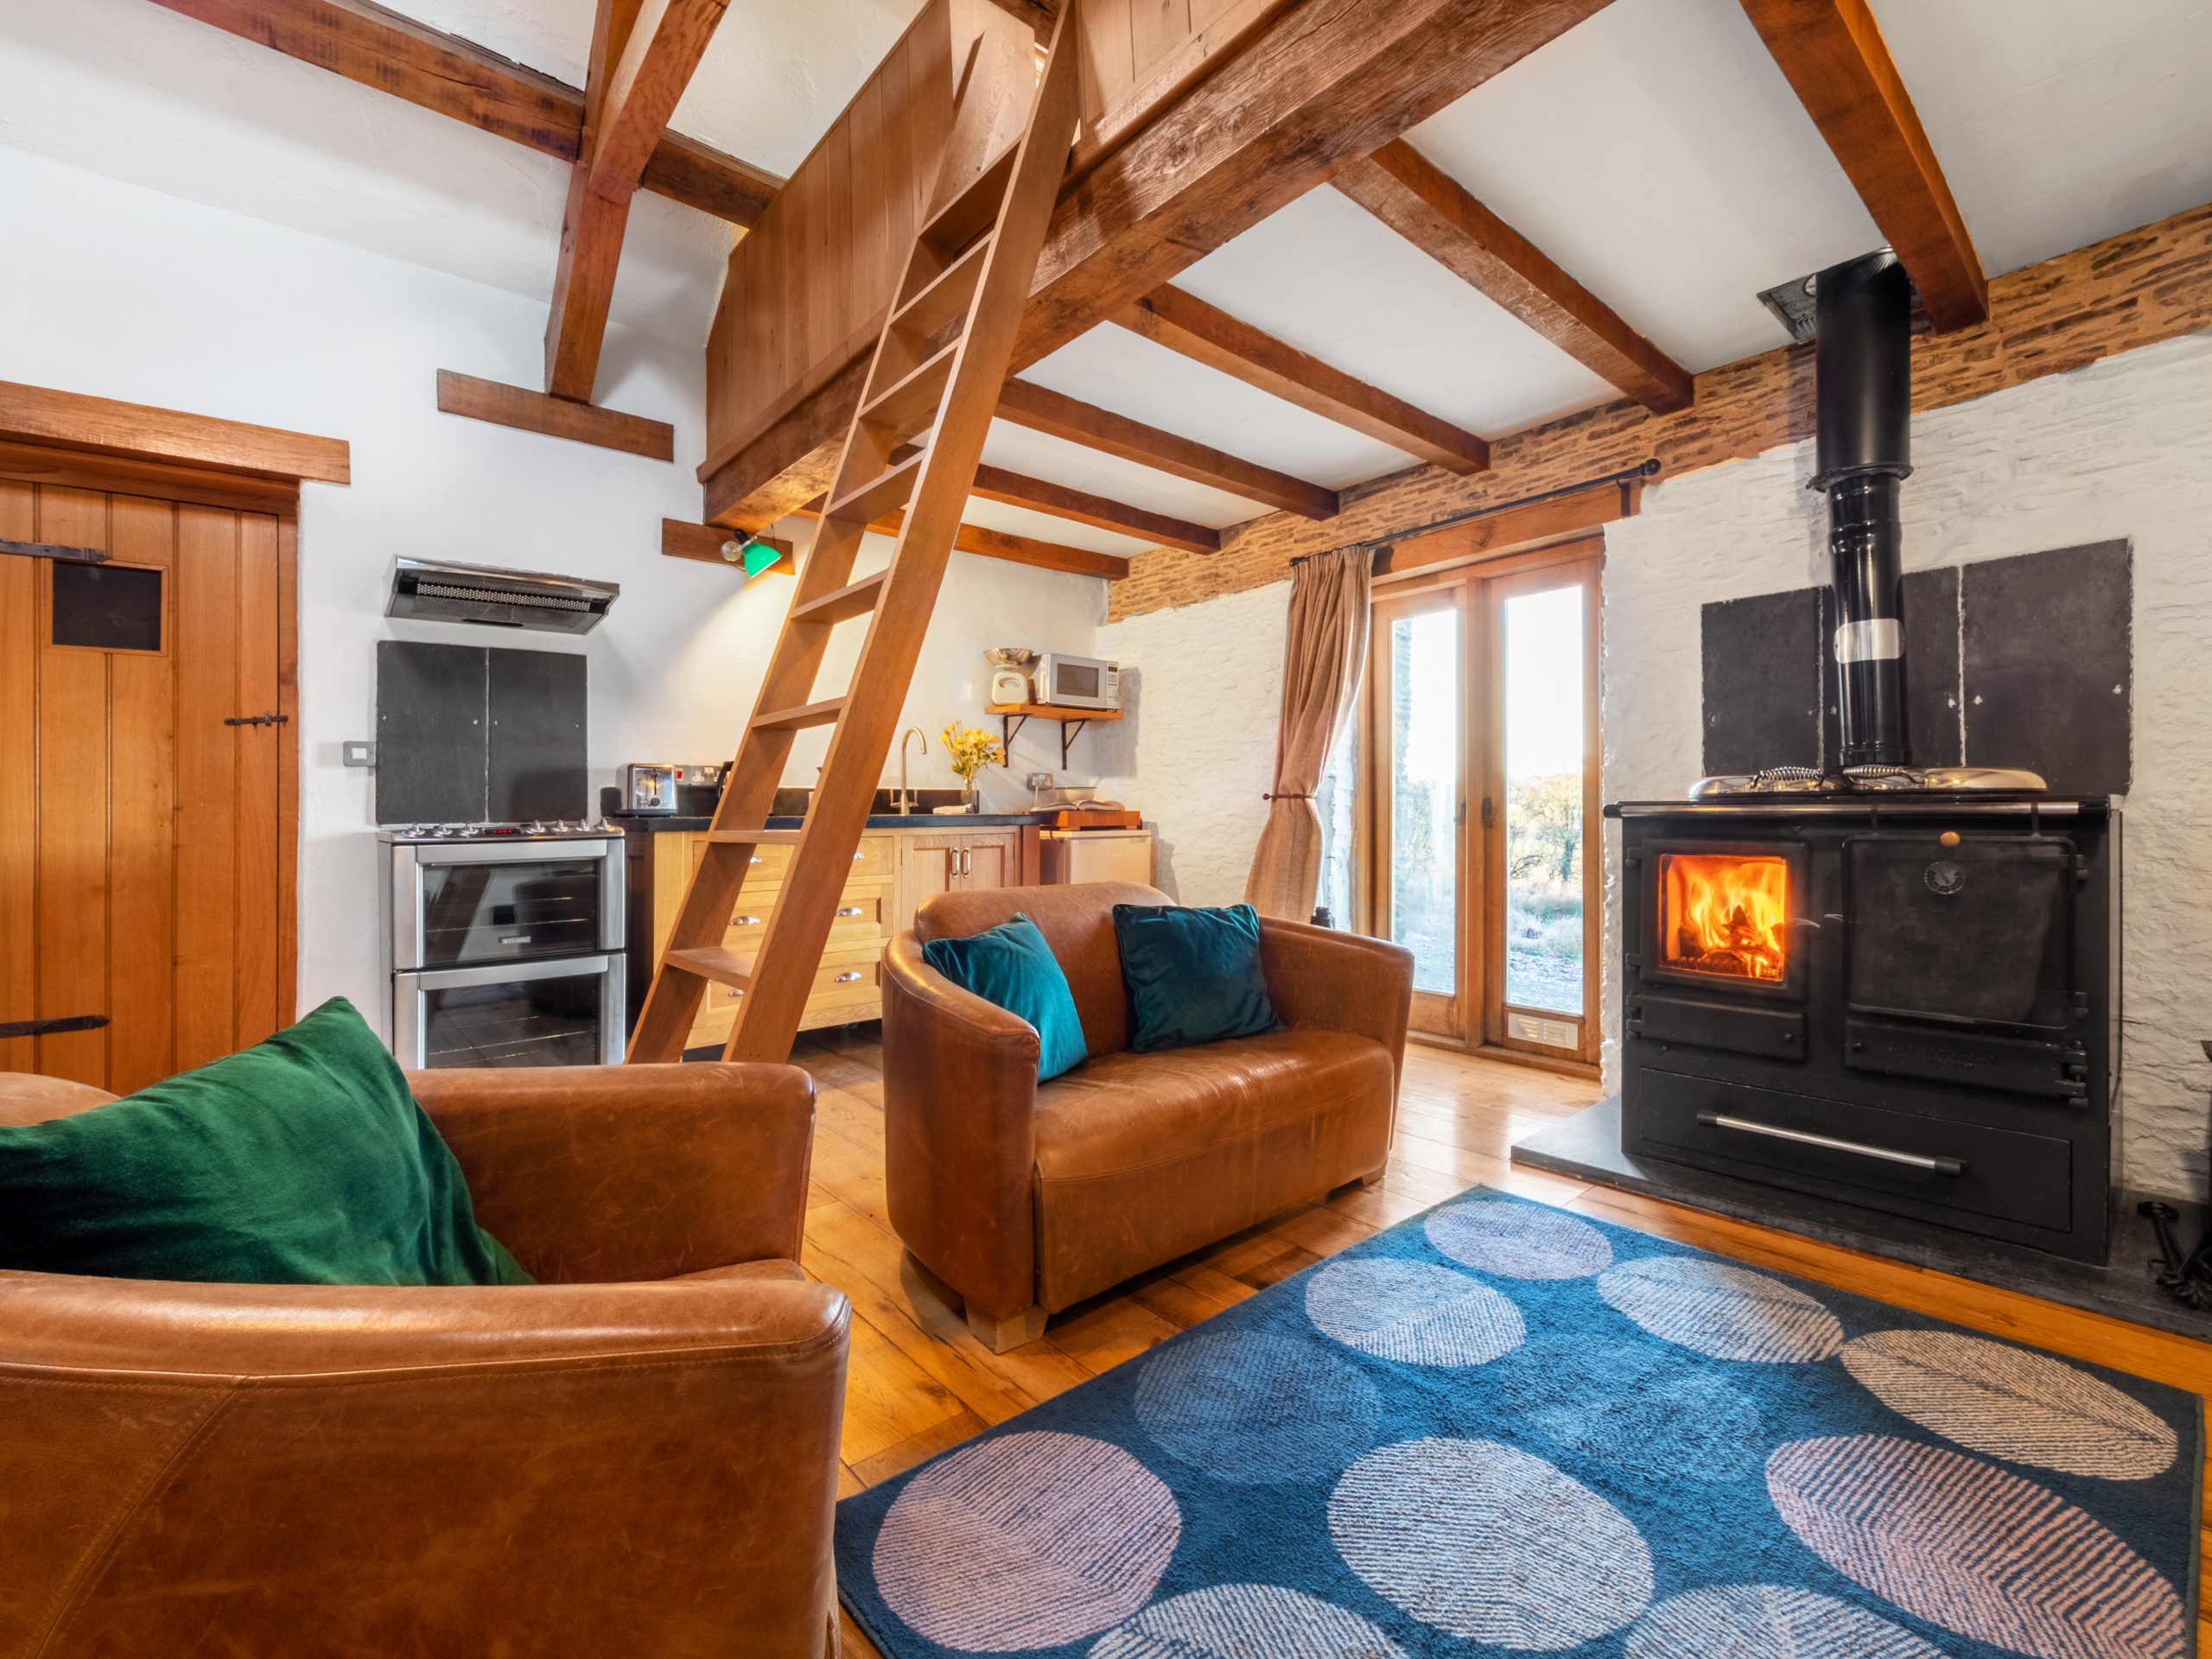 Living room with blue/green run with circles, a leather sofa and chair with a blazing fire and kitchen in the back ground. The the centre of the photo there is a ladder to a mezzanine level